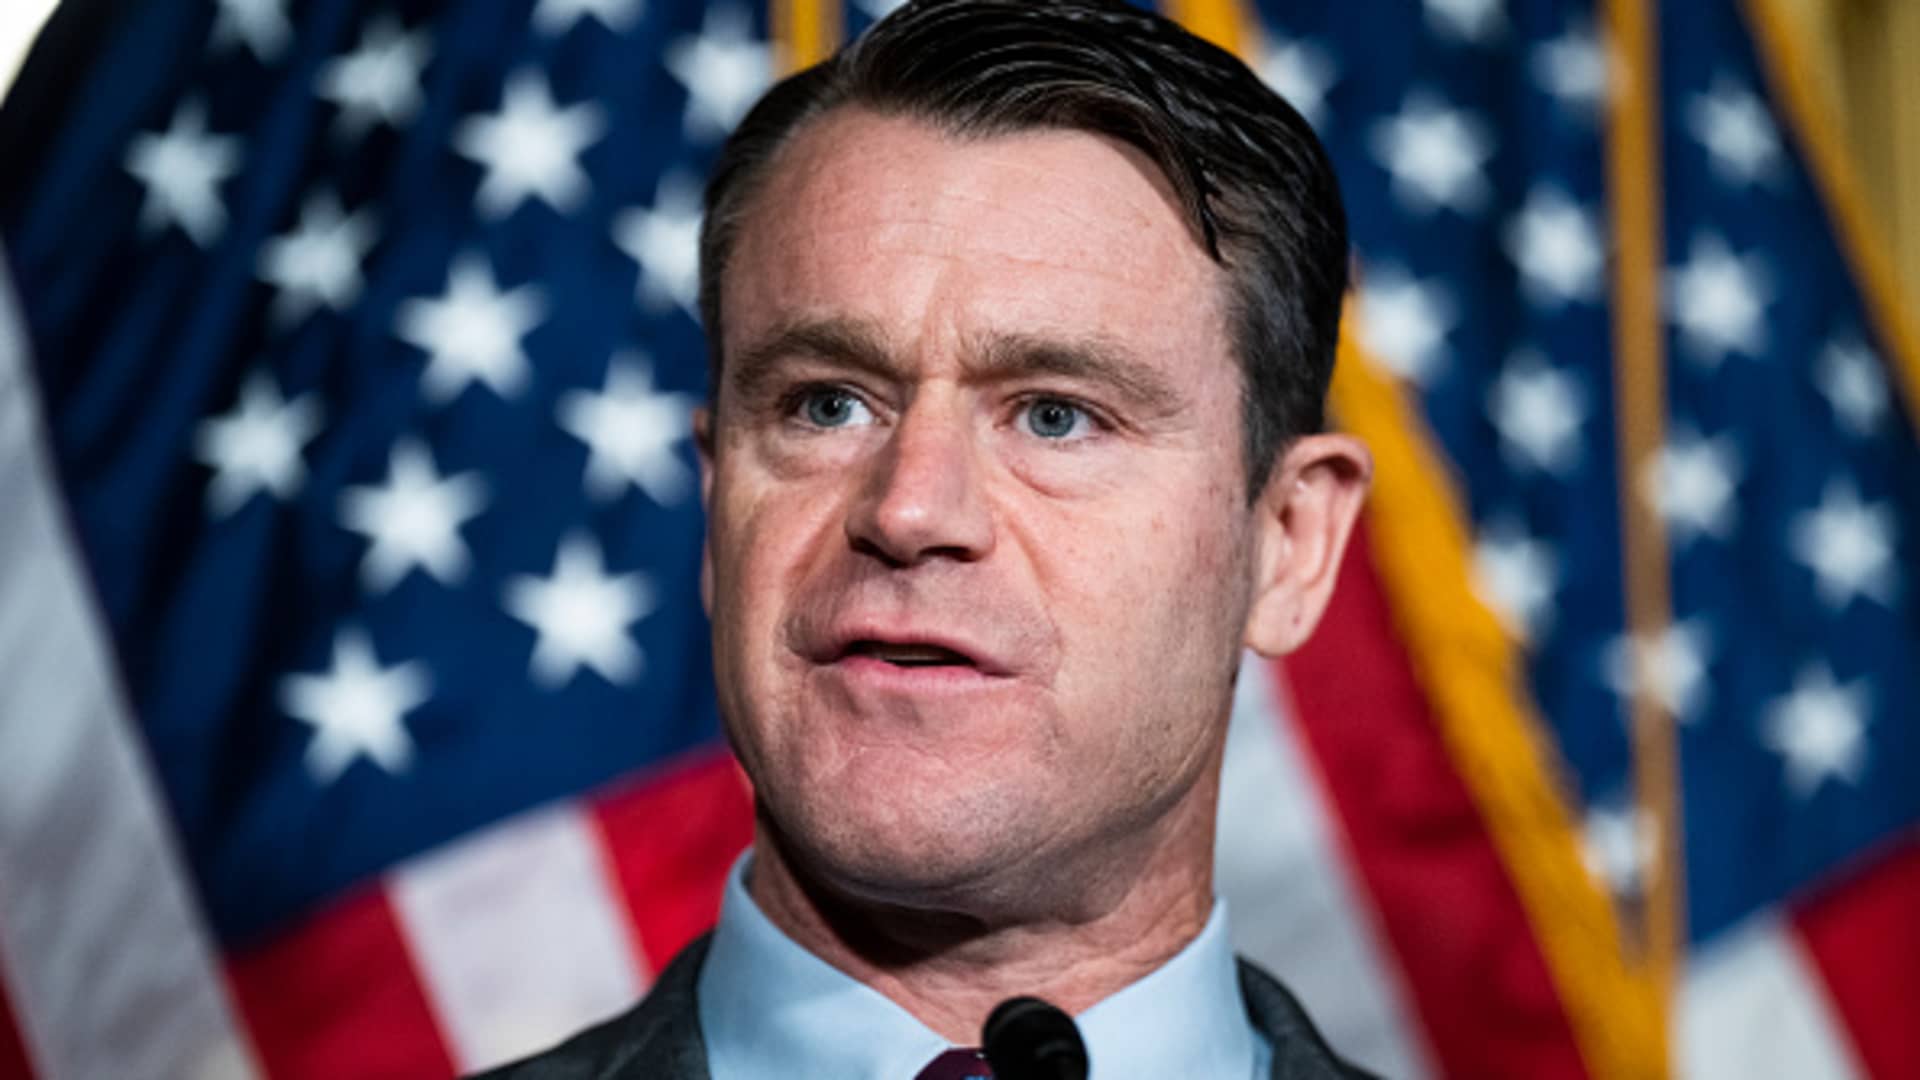 Sen. Todd Young, R-Ind., conducts a news conference in the U.S. Capitol after the Senate passed the CHIPS and Science Act of 2022 on Wednesday, July 27, 2022.